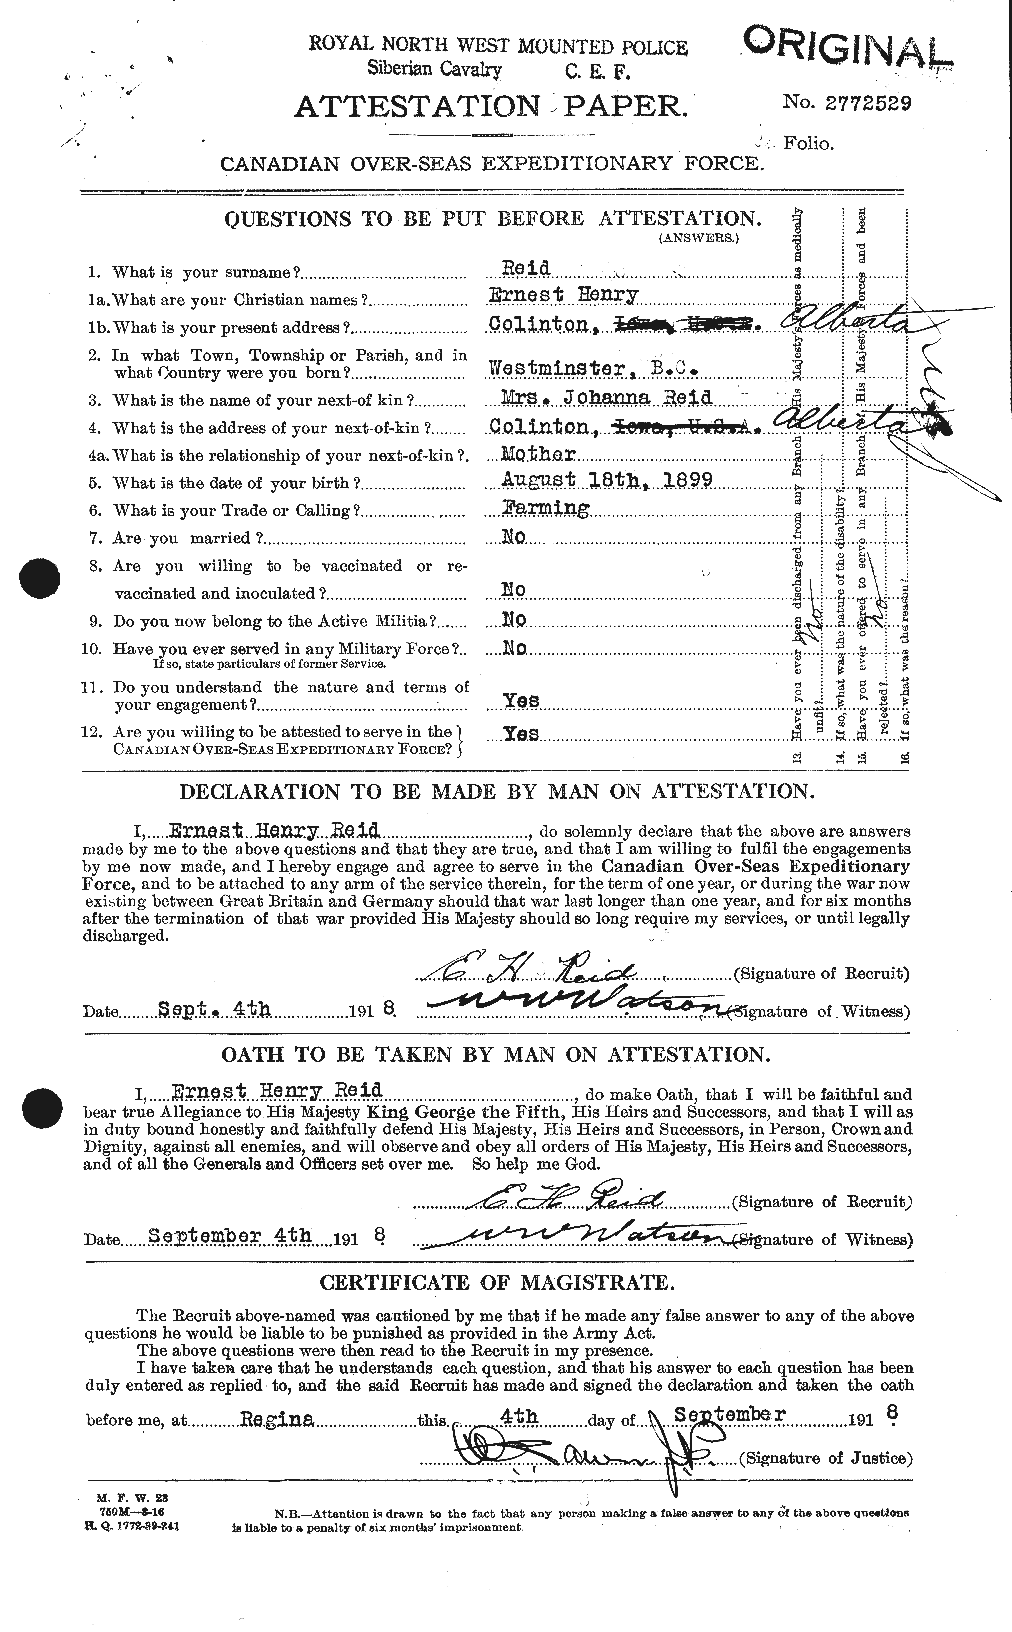 Personnel Records of the First World War - CEF 598018a